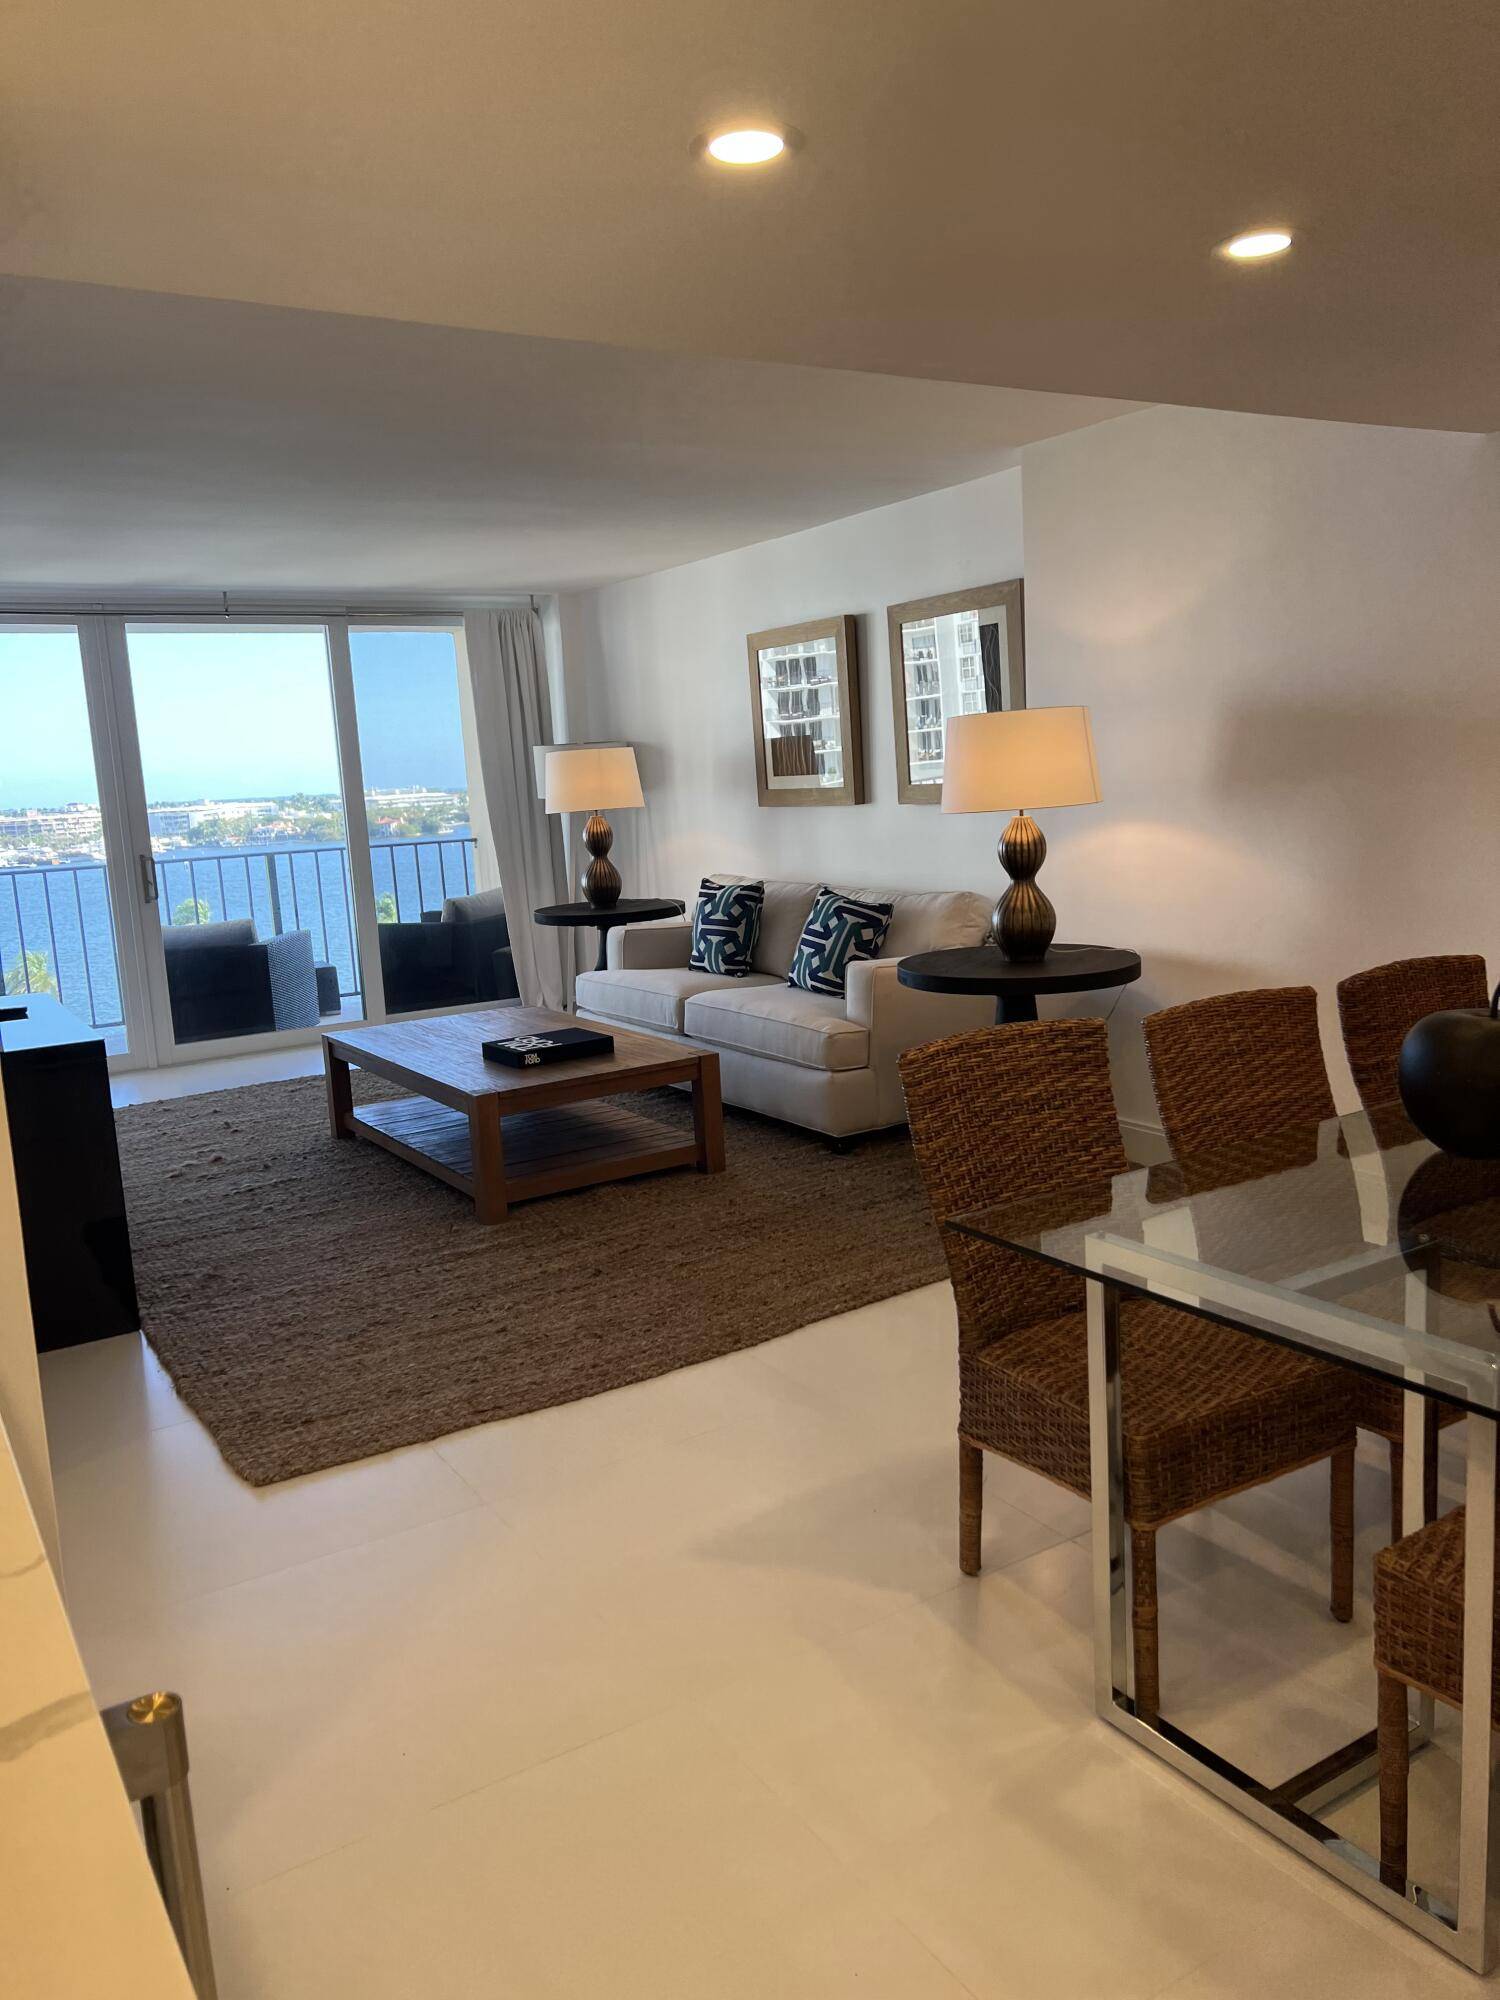 Enjoy this fully renovated, bright and sunny condo with beautiful views of the Intracoastal.